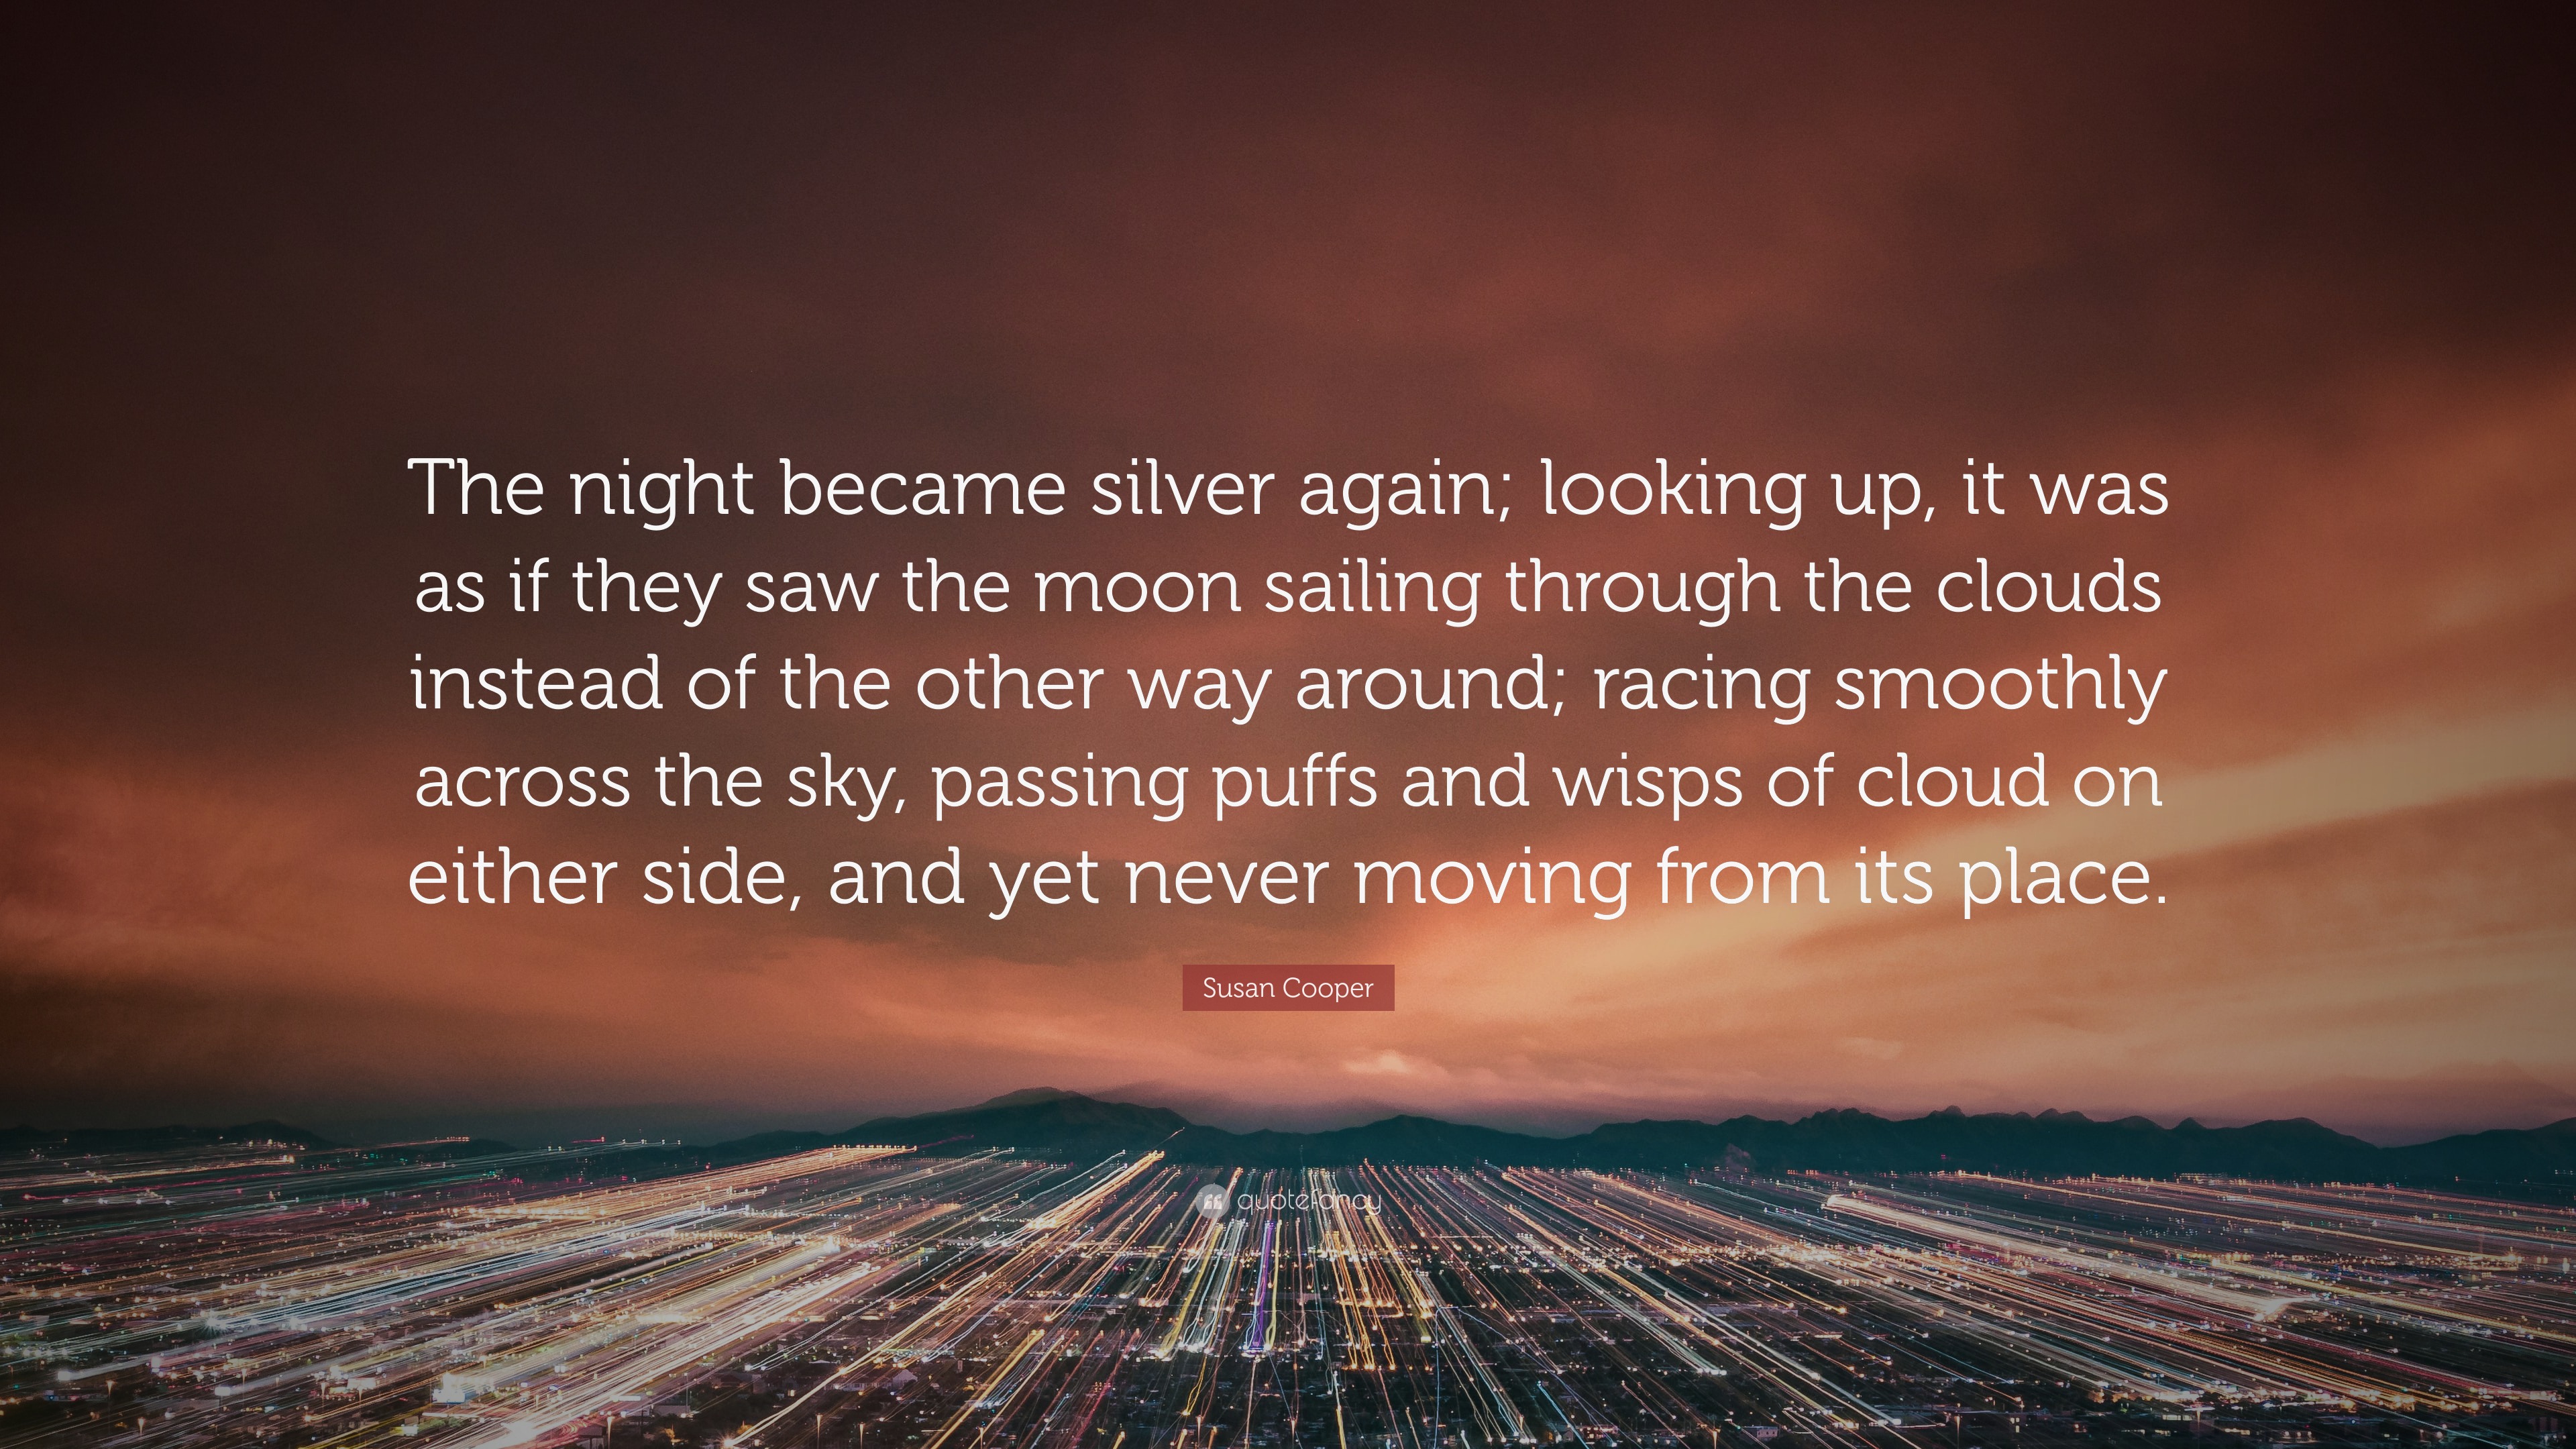 Susan Cooper Quote: “The night became silver again; looking up, it was as  if they saw the moon sailing through the clouds instead of the othe...”